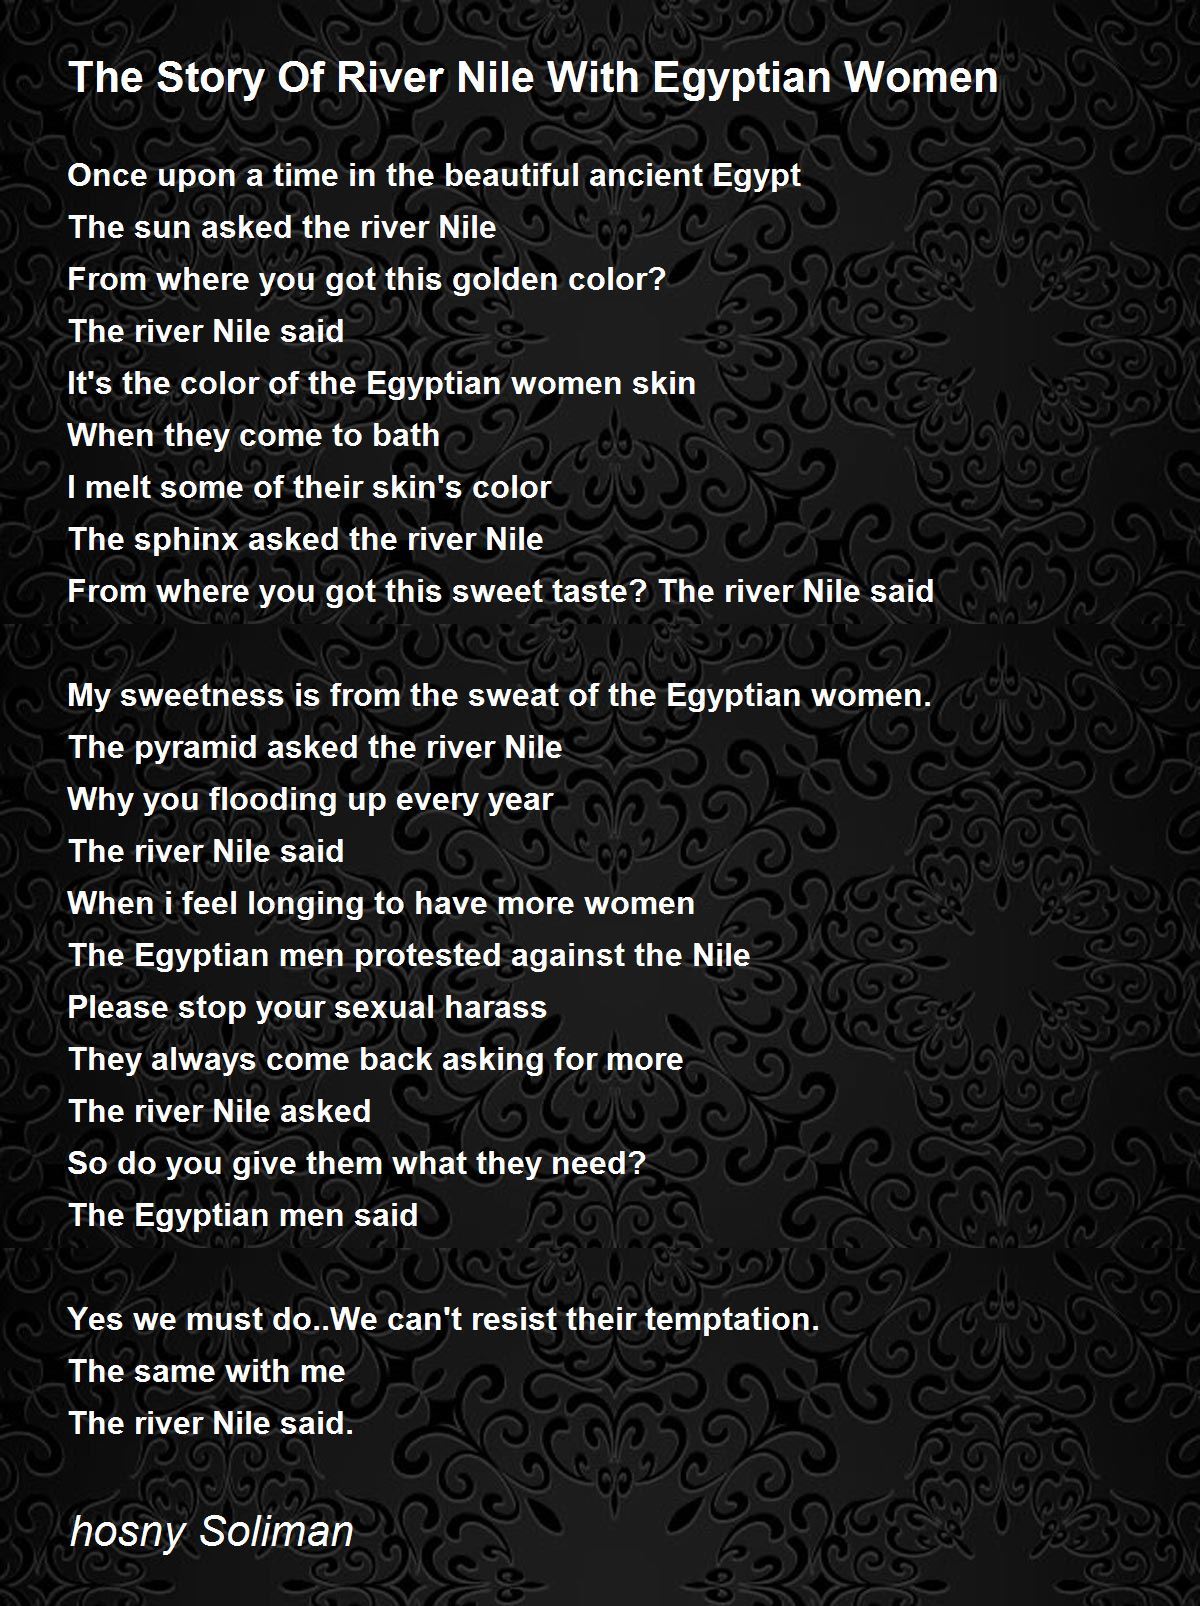 The Story Of River Nile With Egyptian Women Poem by hosny Soliman Poem Hunter